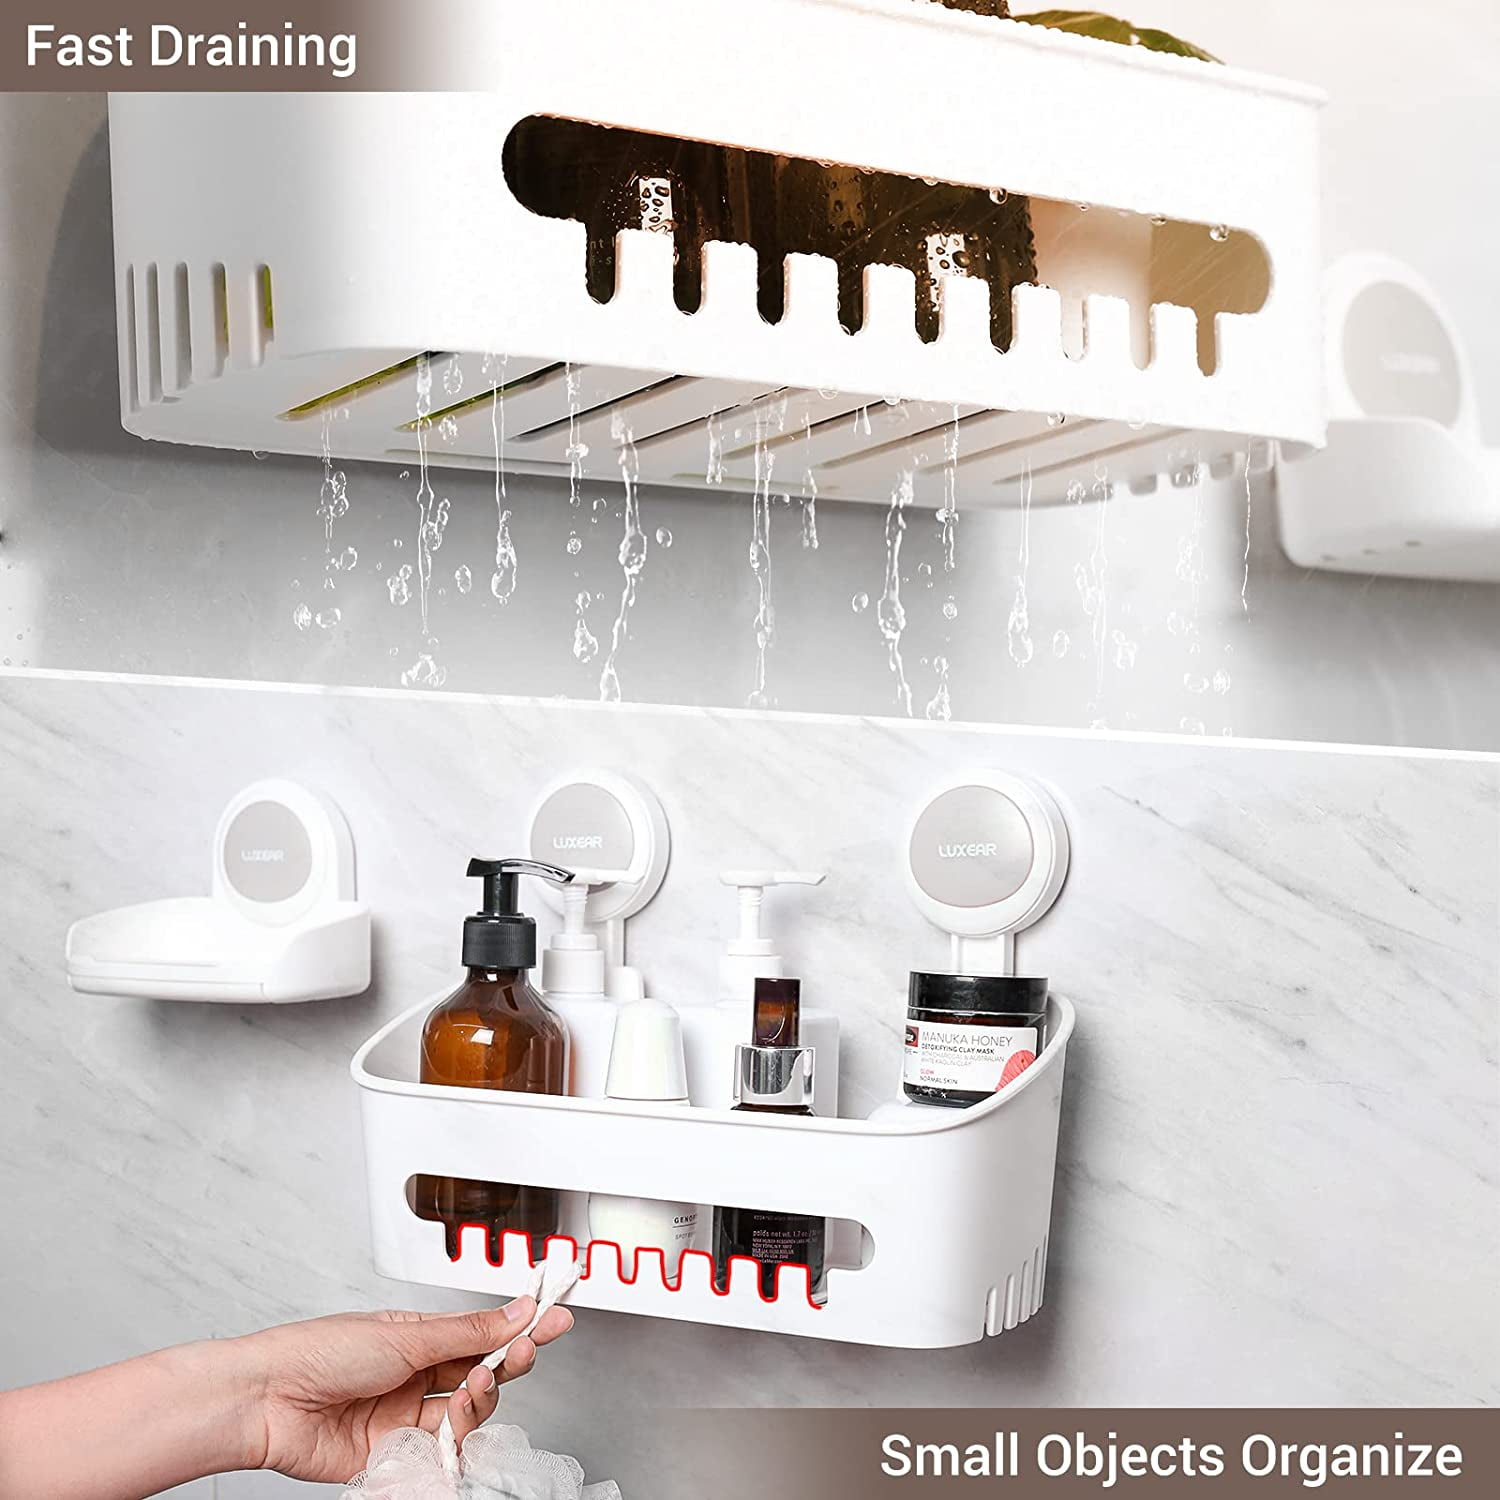  LUXEAR Shower Caddy Suction Cup NO-Drilling Removable Shower  Shelf Powerful Heavy Duty Hold up to 22lbs with pack suction shower hooks  replacement hooks : Home & Kitchen